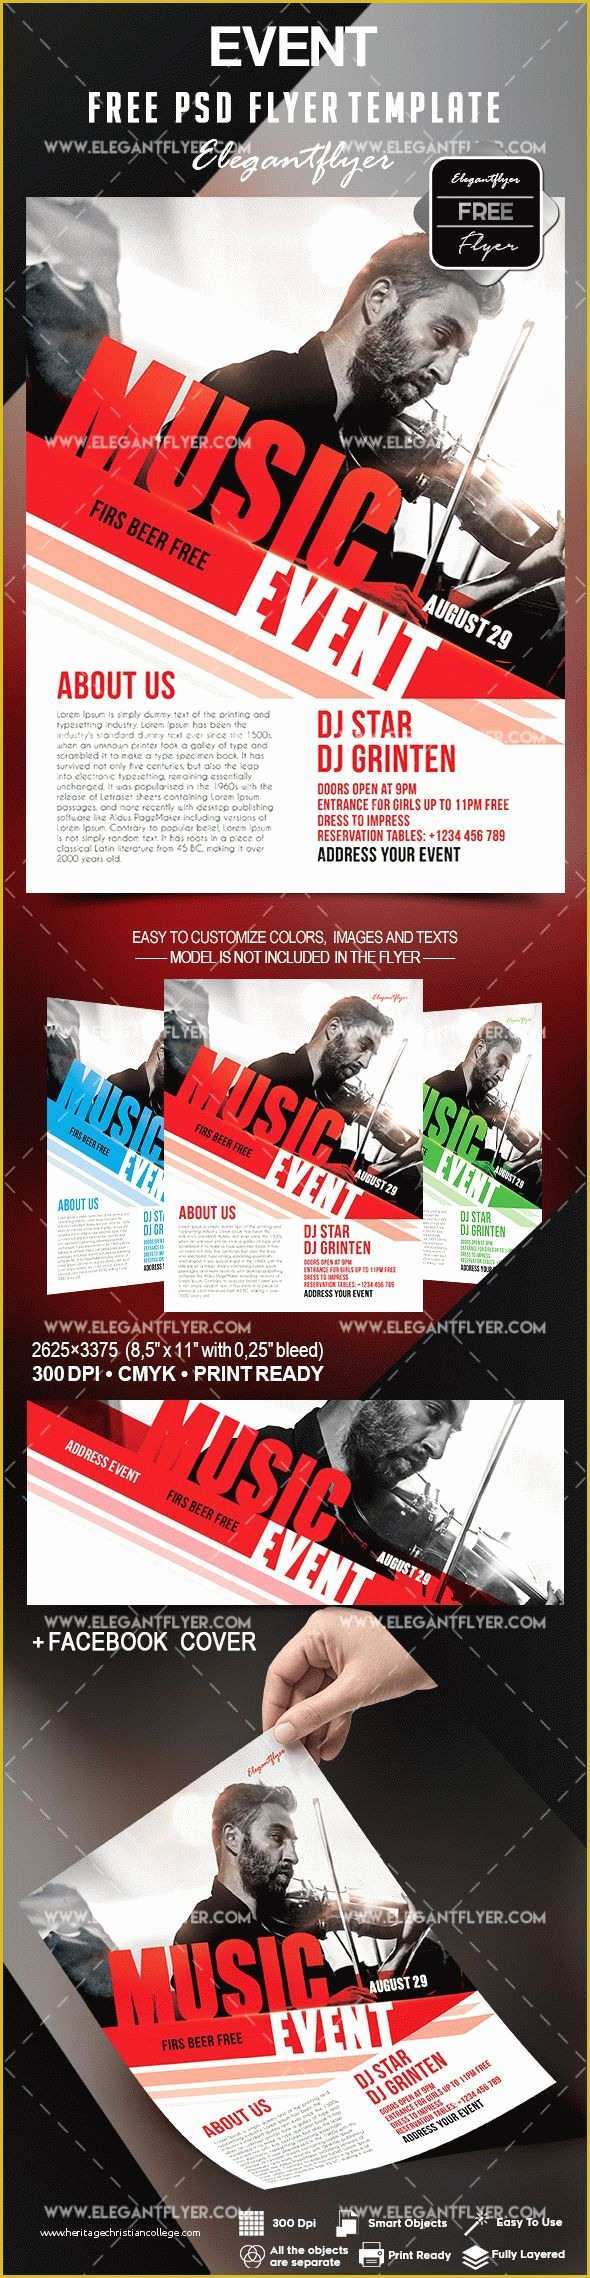 Free Music event Flyer Templates Of Free Music event Flyer Templates – by Elegantflyer